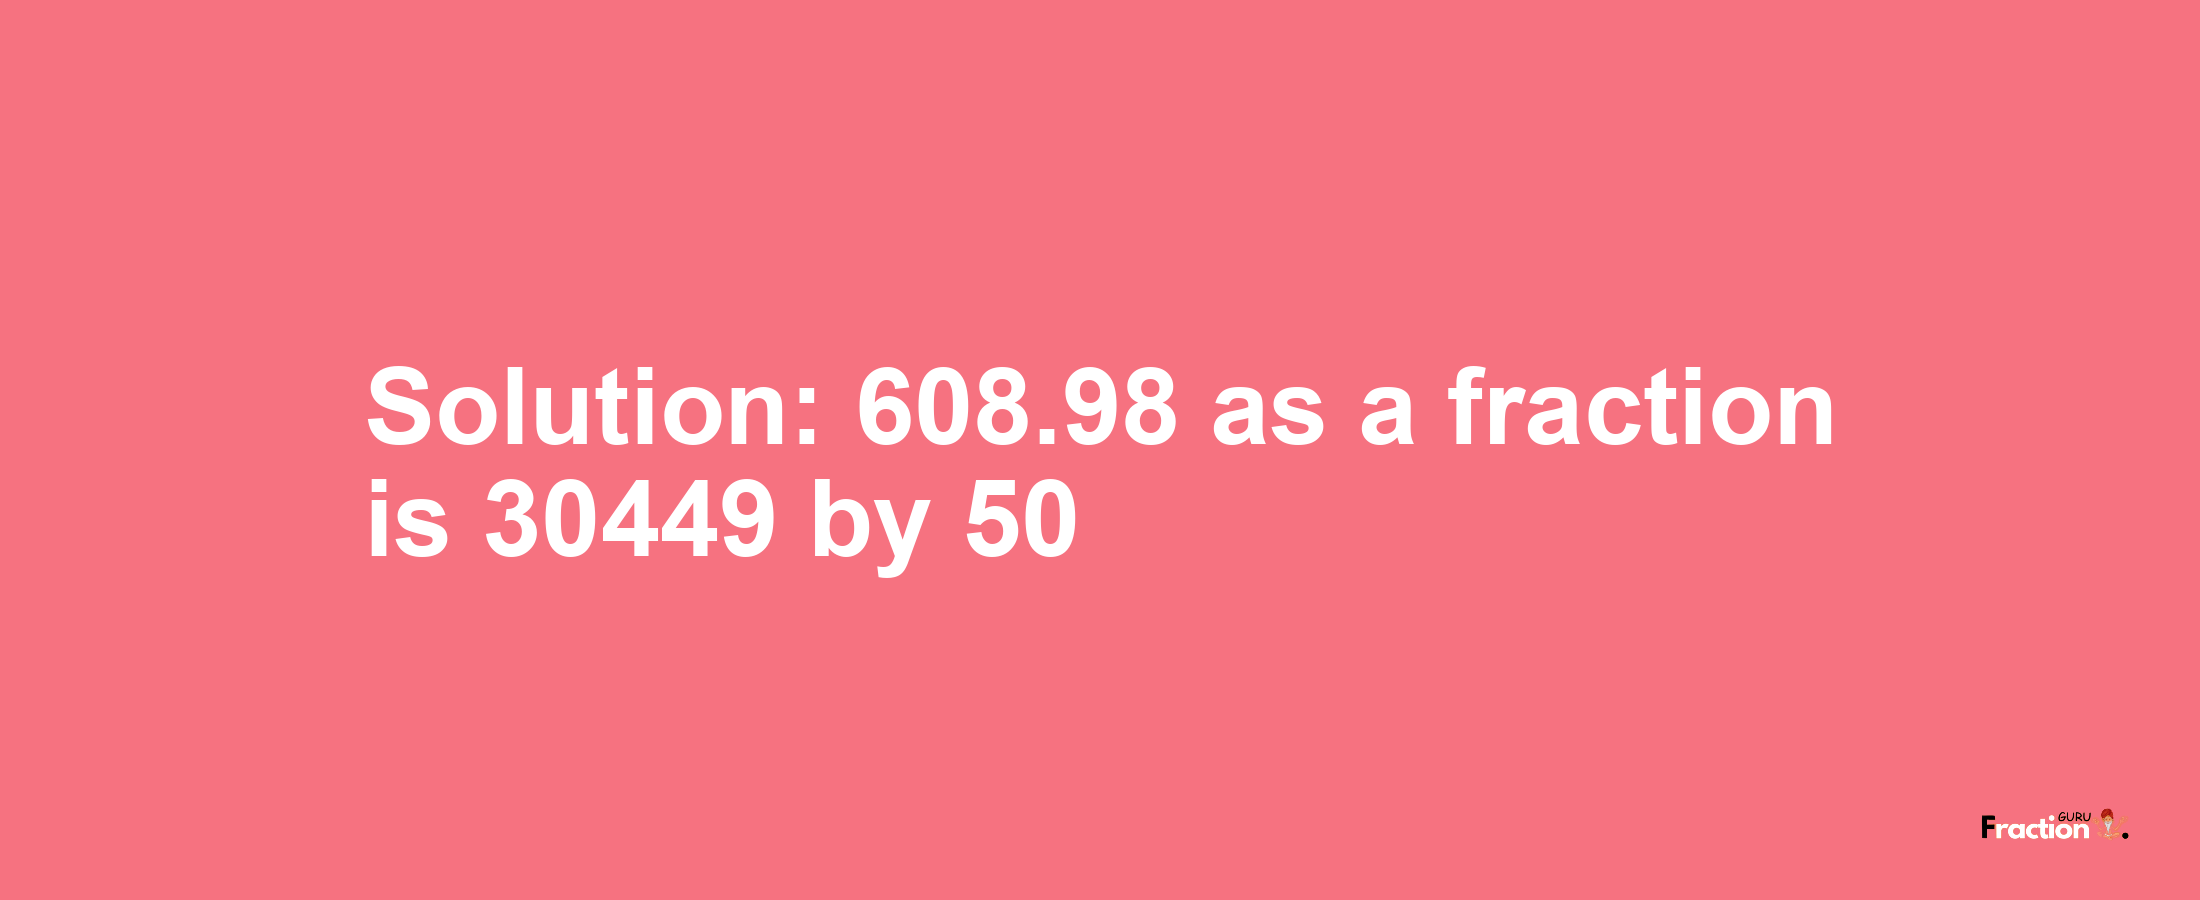 Solution:608.98 as a fraction is 30449/50